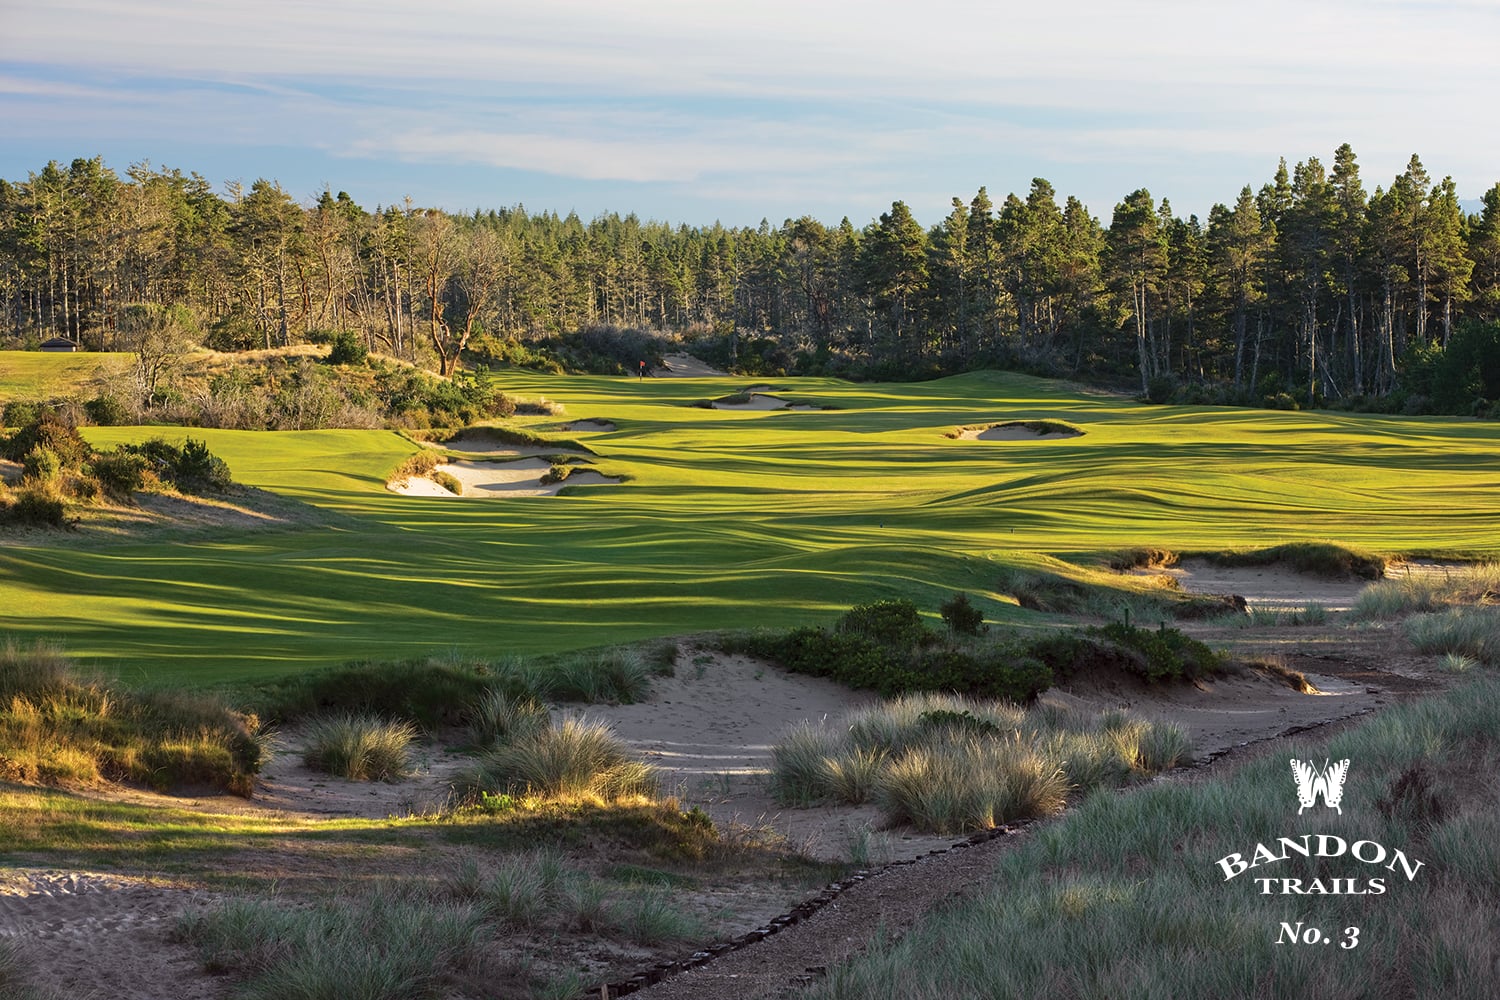 Image of the 3rd hole and sweeping forest, Bandon Trails Golf Course, Bandon Dunes Golf Resort, Oregon, USA